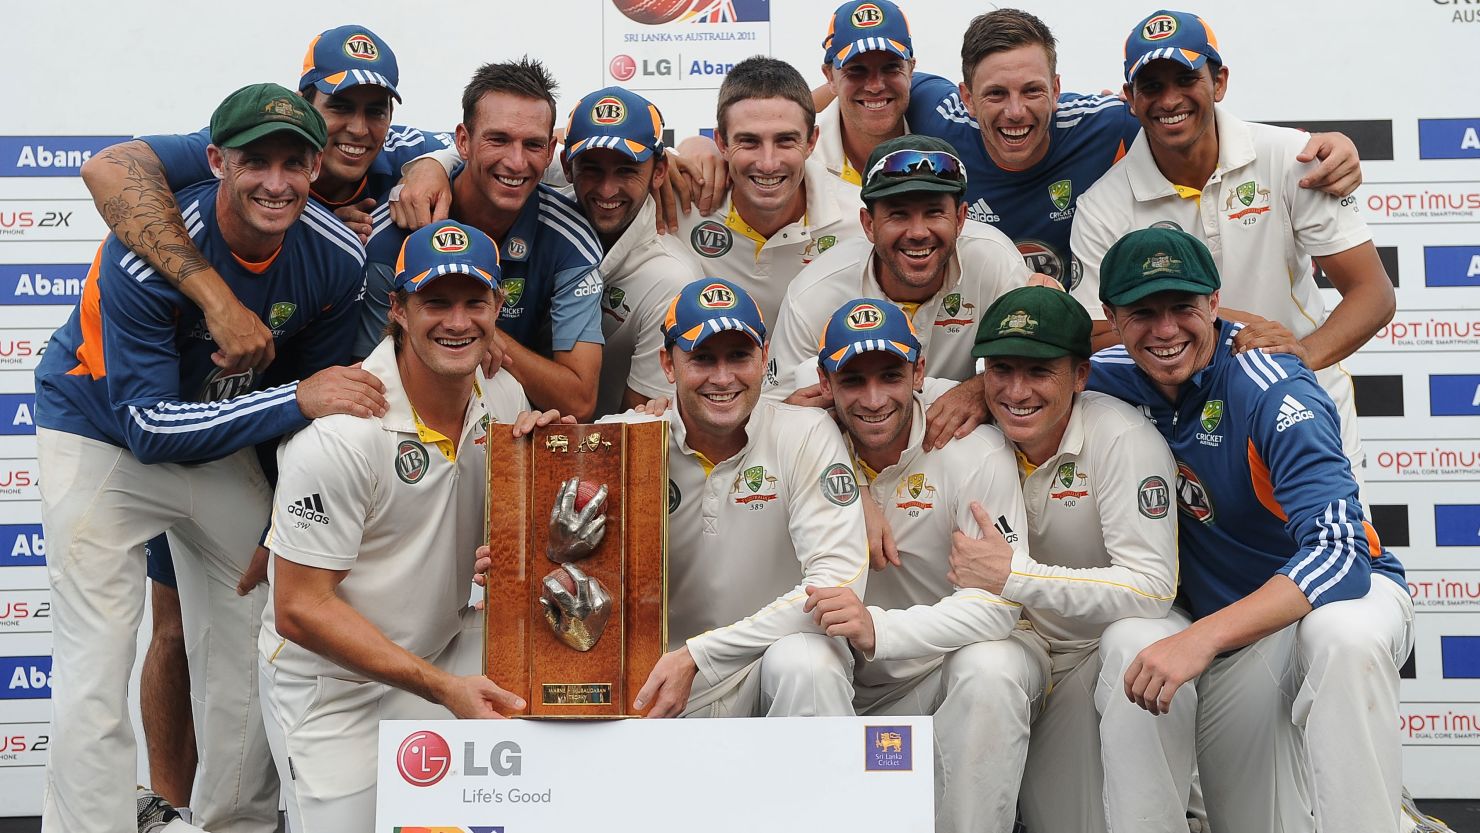 Australia led by captain Michael Clarke (center) celebrate after victory in the Test match series against Sri Lanka in Colombo